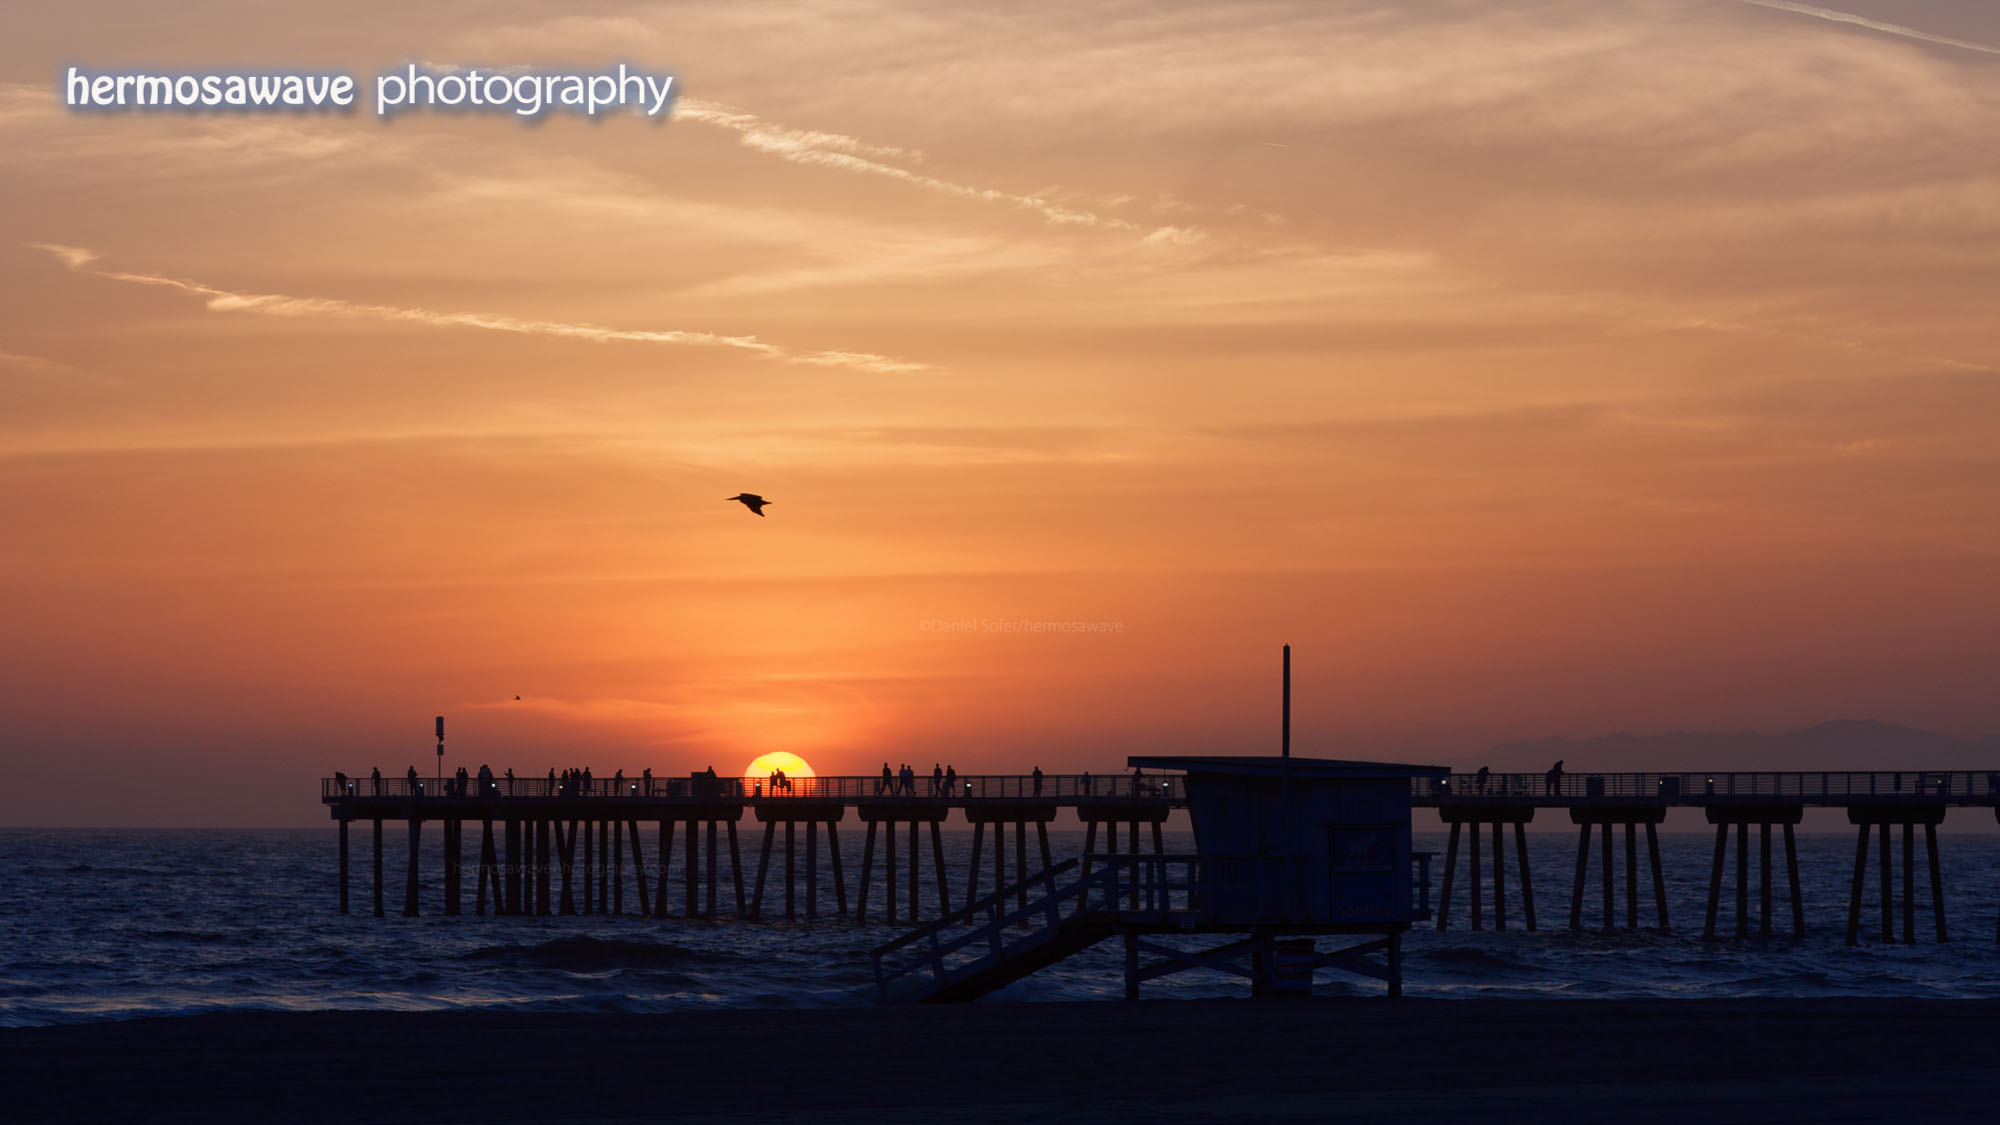 Sunset over the Hermosa Pier